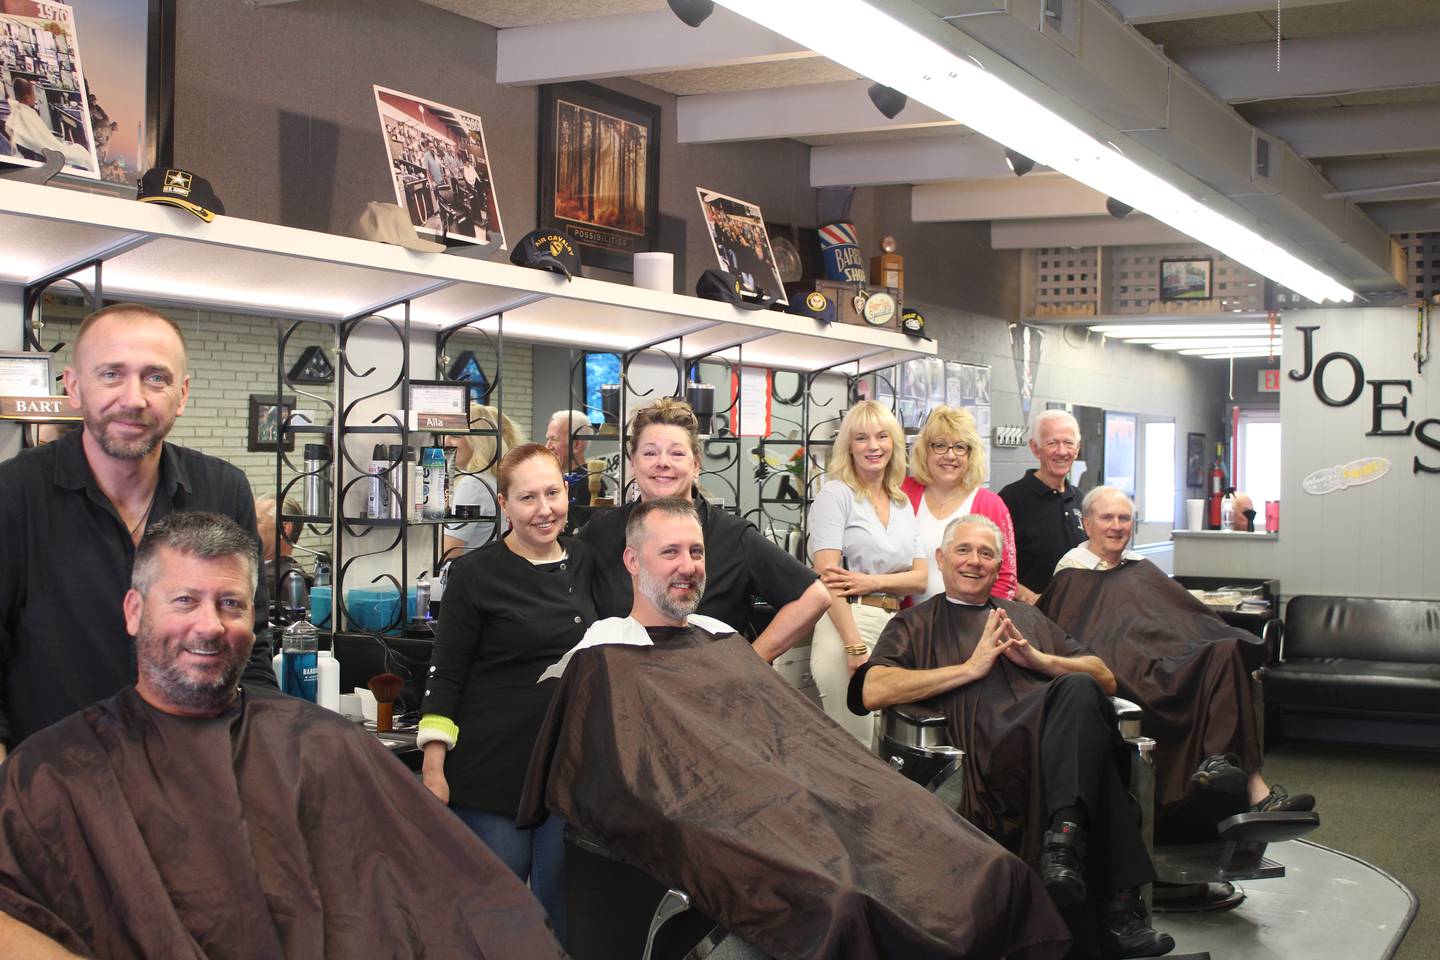 Joe's Barber Shop staff in downtown Crystal Lake celebrate Jack McArdle's 65 years of service.